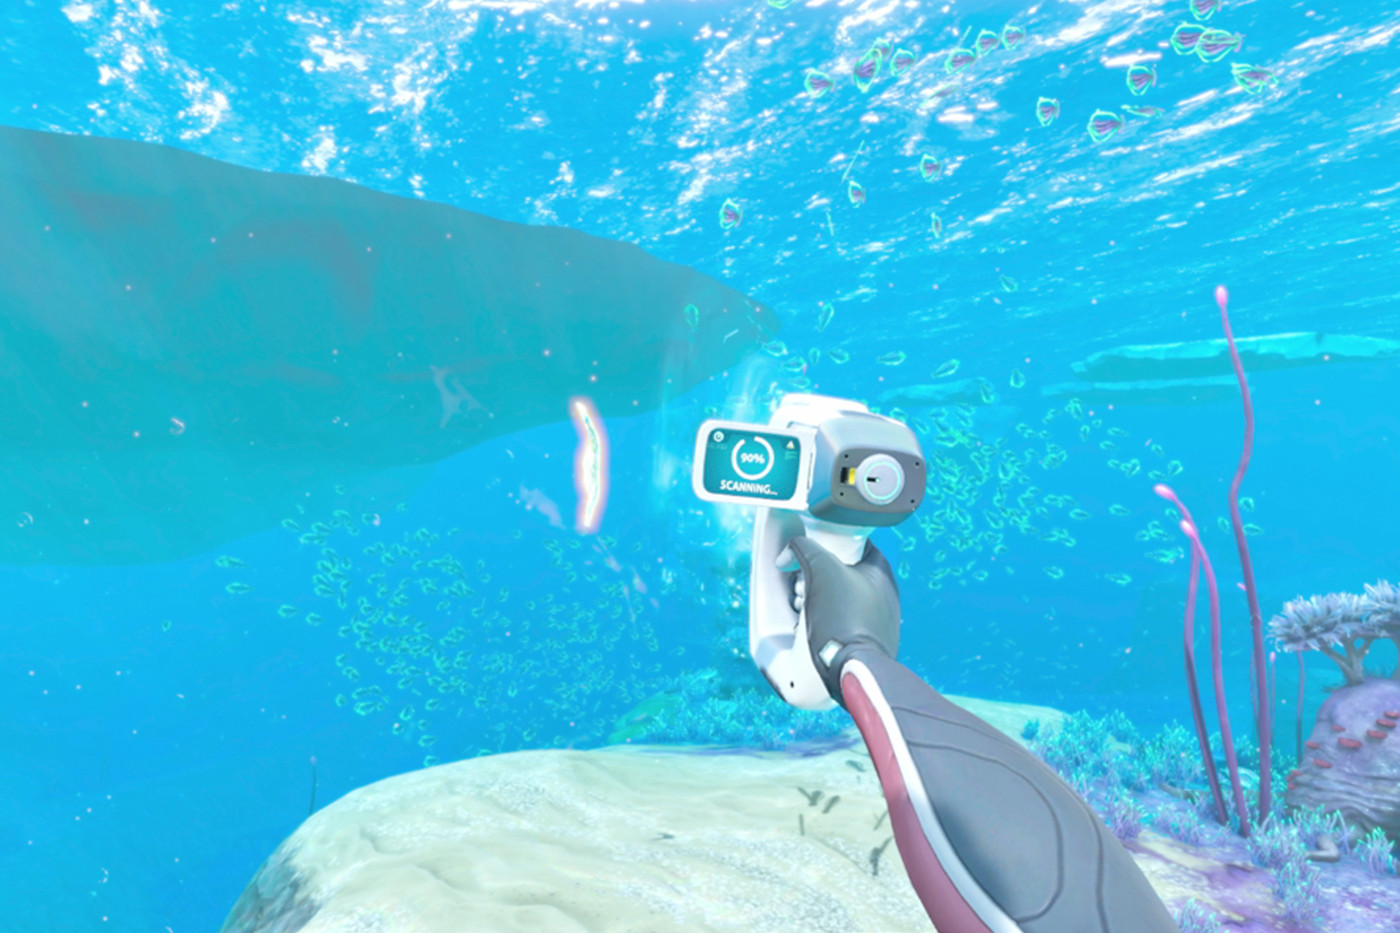 Subnautica: Below Zero guide: How to recharge batteries and tools.